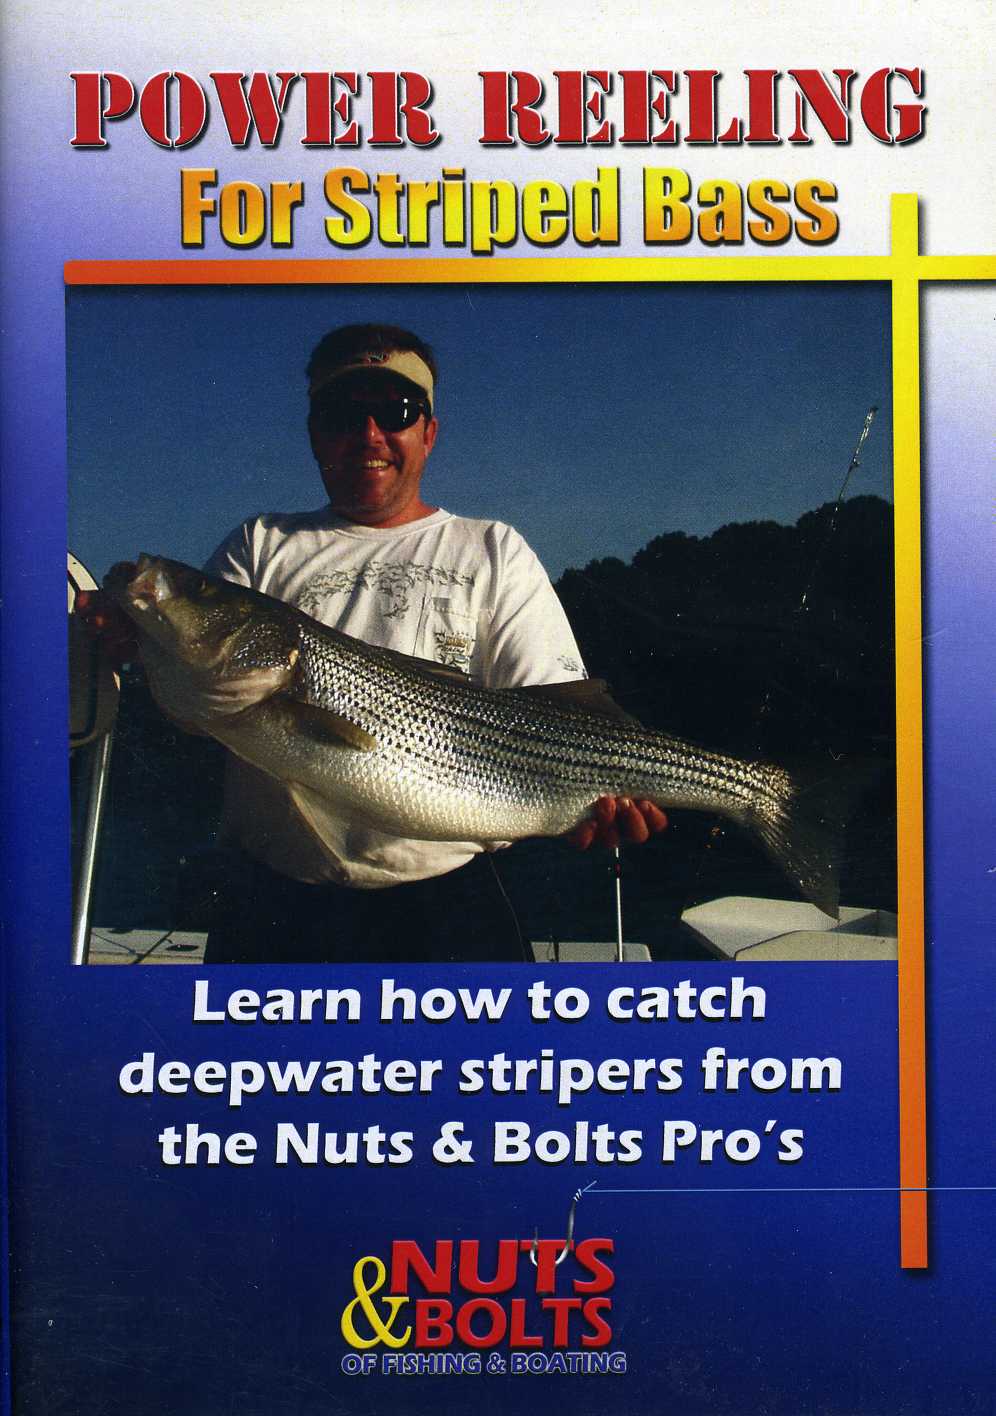 POWER REELING FOR STRIPED BASS